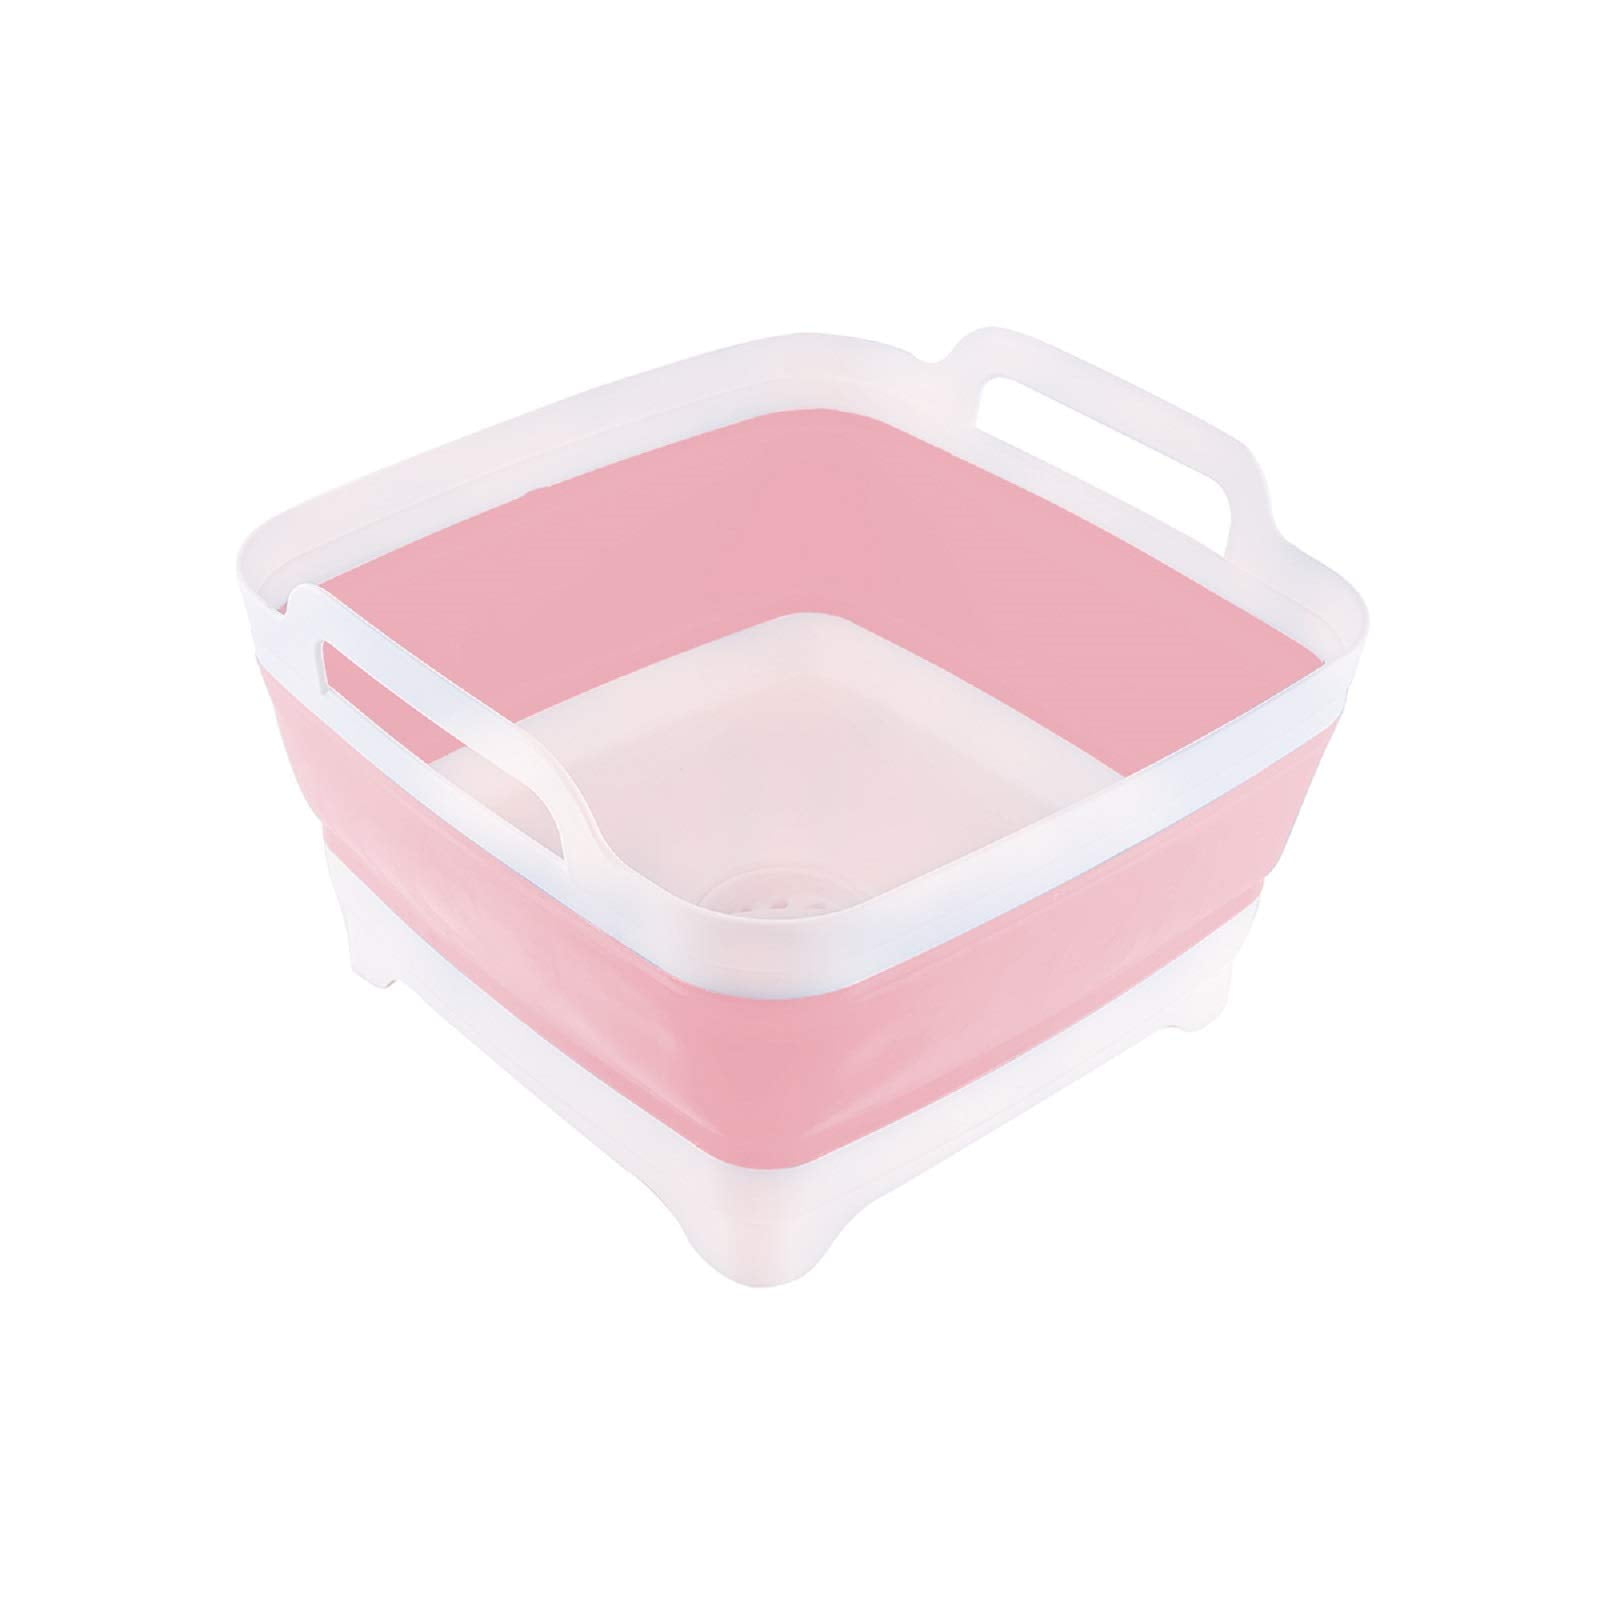 Grofry Kitchen Folding Countertop Dish Bowl Cup Drying Draining Board Rack Holder Stand Pink, Size: 21